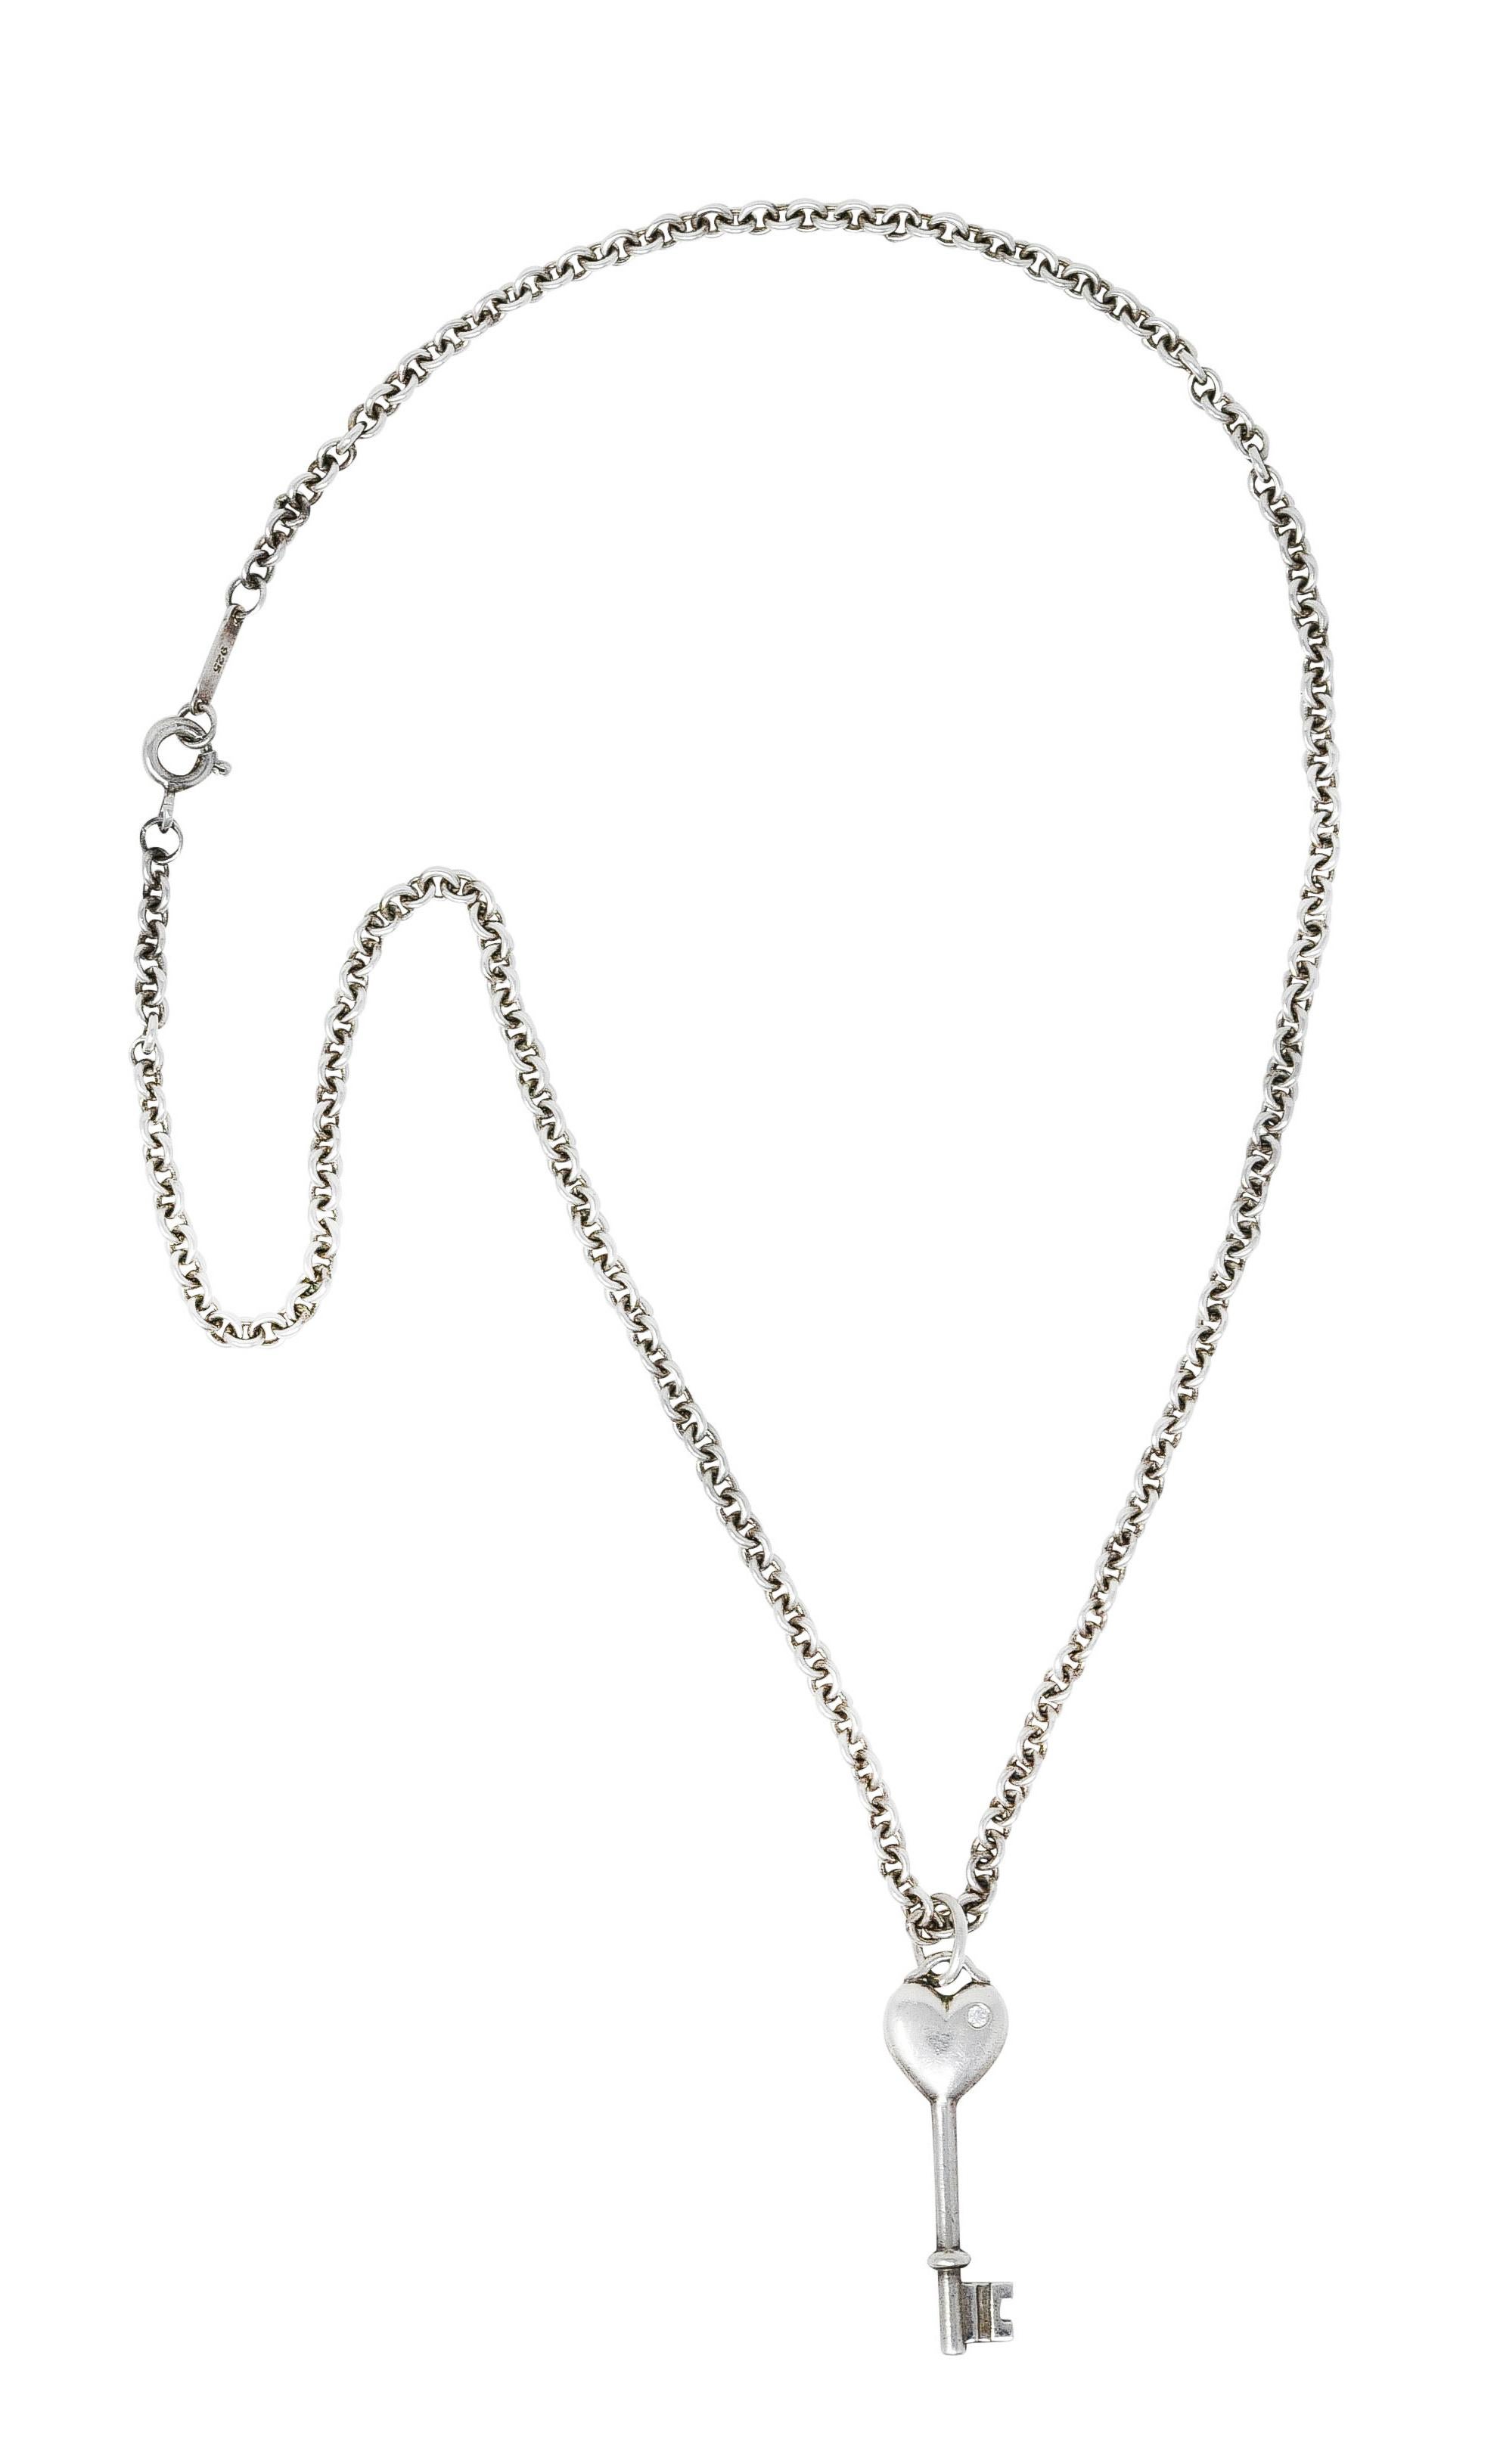 Necklace designed as cable chain suspending skeleton style key 

Featuring puffy heart motif head

Accented by round brilliant cut diamond 

Diamond weighs approximately 0.01 carat - eye clean and bright

Completed by spring clasp

Stamped 925 for